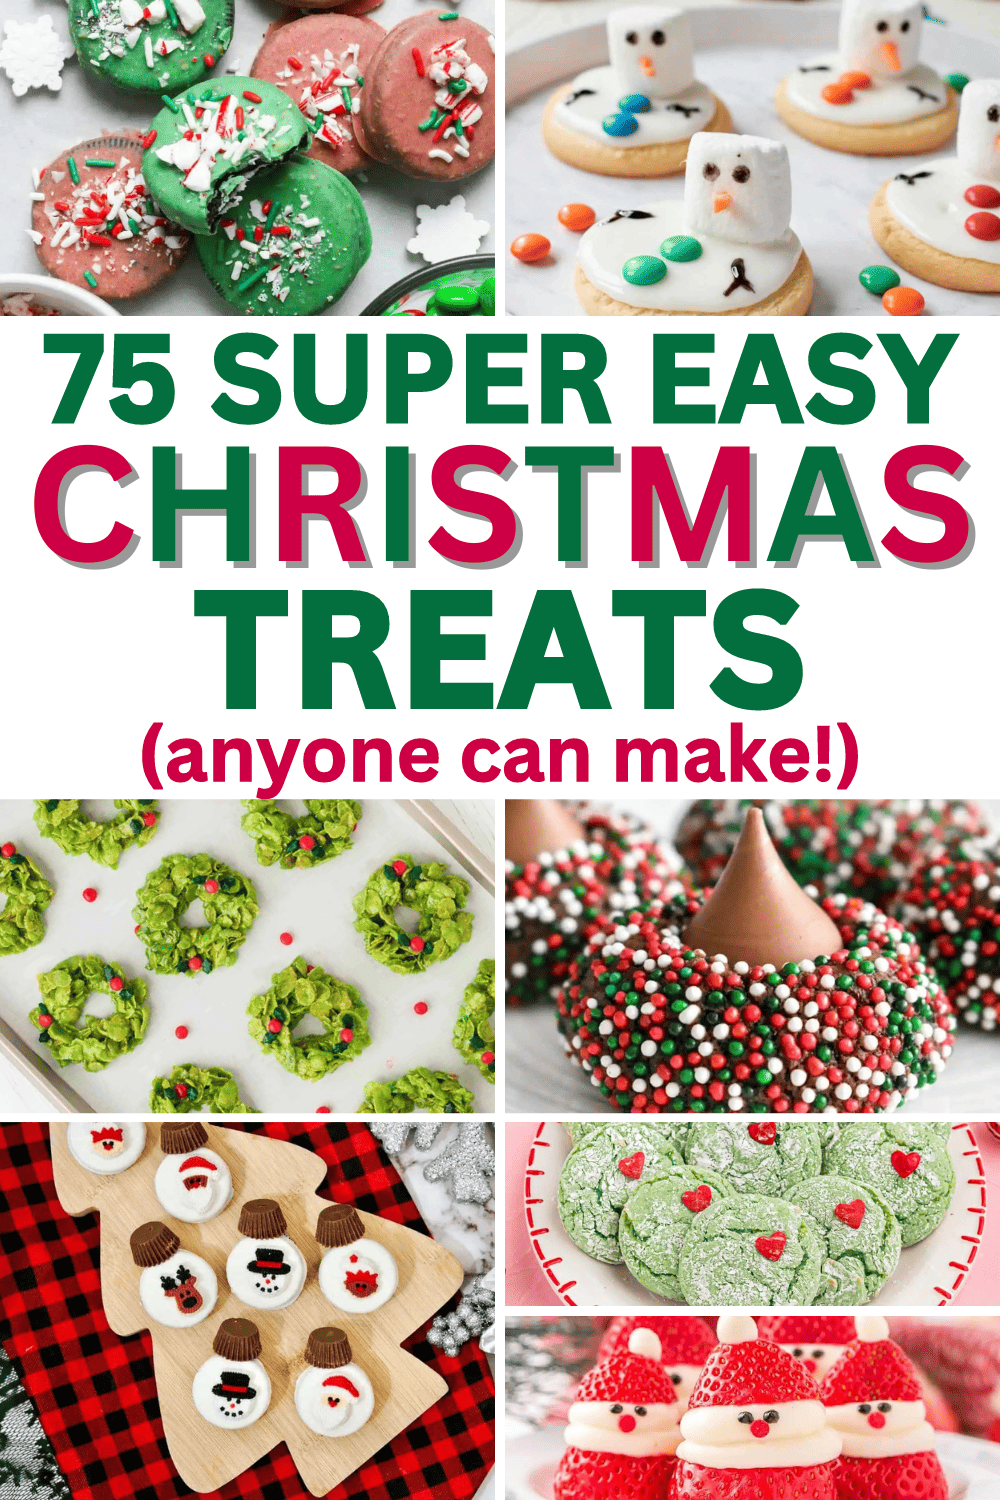 Quick and easy Christmas treats! These easy fun holiday treats are cute Christmas food gifts, snacks for a party or xmas treats for kids to make. Easy christmas treats to make, easy christmas treats to make food gifts, easy christmas cookies for kids simple holiday treats, christmas baking ideas treats easy, easy holiday treats gifts, no bake christmas treats easy for kids, xmas treats ideas easy diy, cute christmas desserts for a crowd, easy christmas sweets recipes, homemade christmas treats.